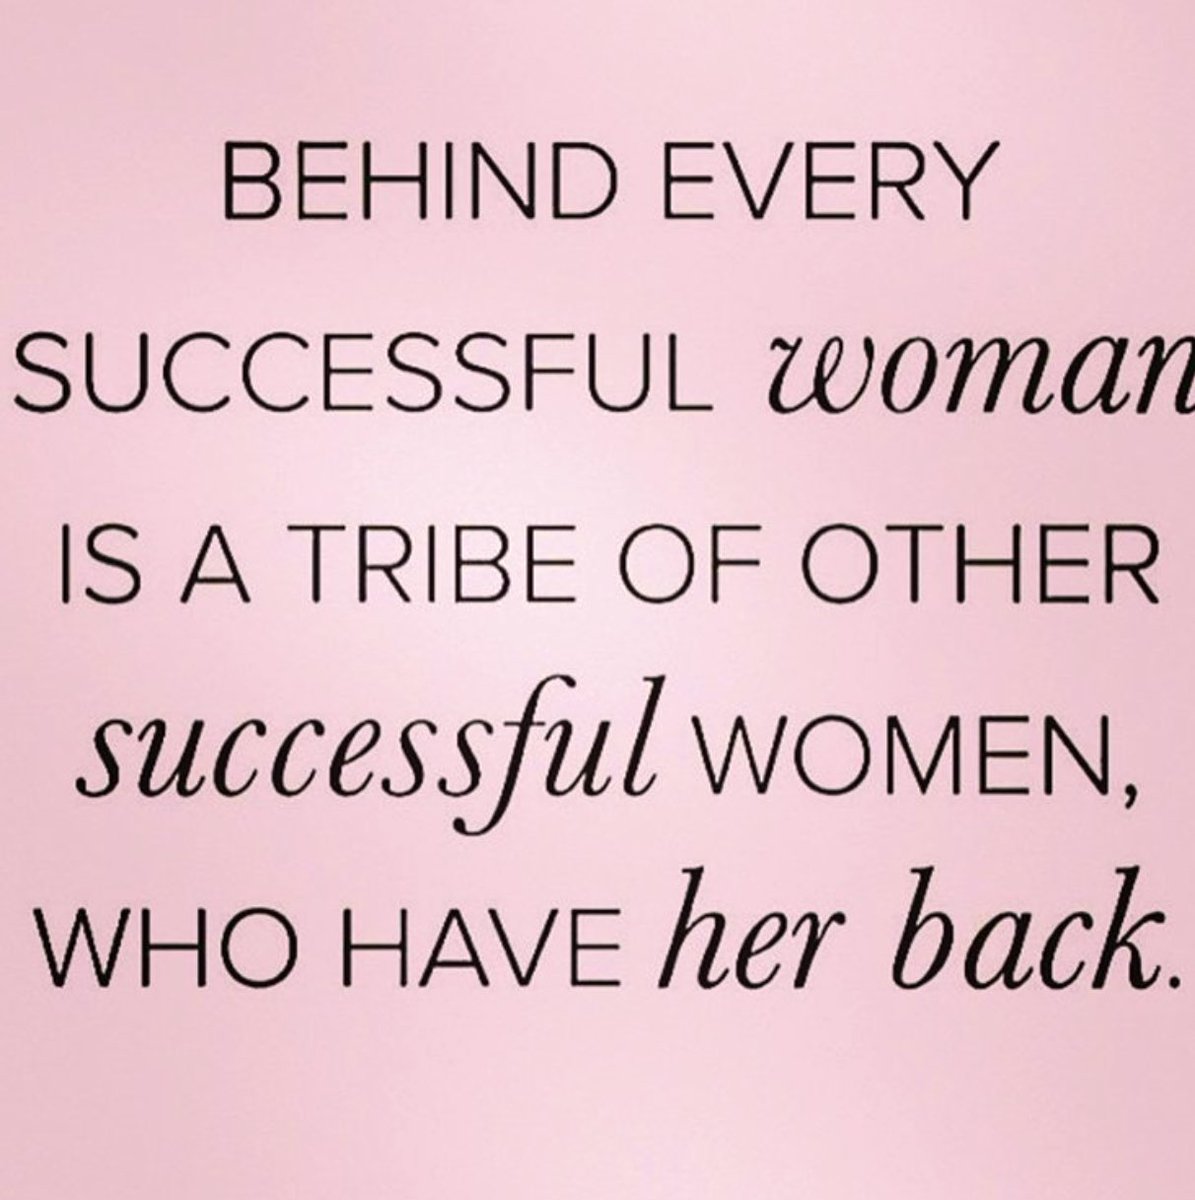 #HappyInternationalWomensDay to all the wonderful women I know 💪 Marie @JennaWall19 @KatyLissaman @julesb300 @carlaandersonMW @lisamcq20107577 @MarionD08729697 @AutonRuth @ElaineH13040549 @gayleth33989459 @Margare27176151 @clagger0 @MidwivesBright #NorthumbriaMidwives